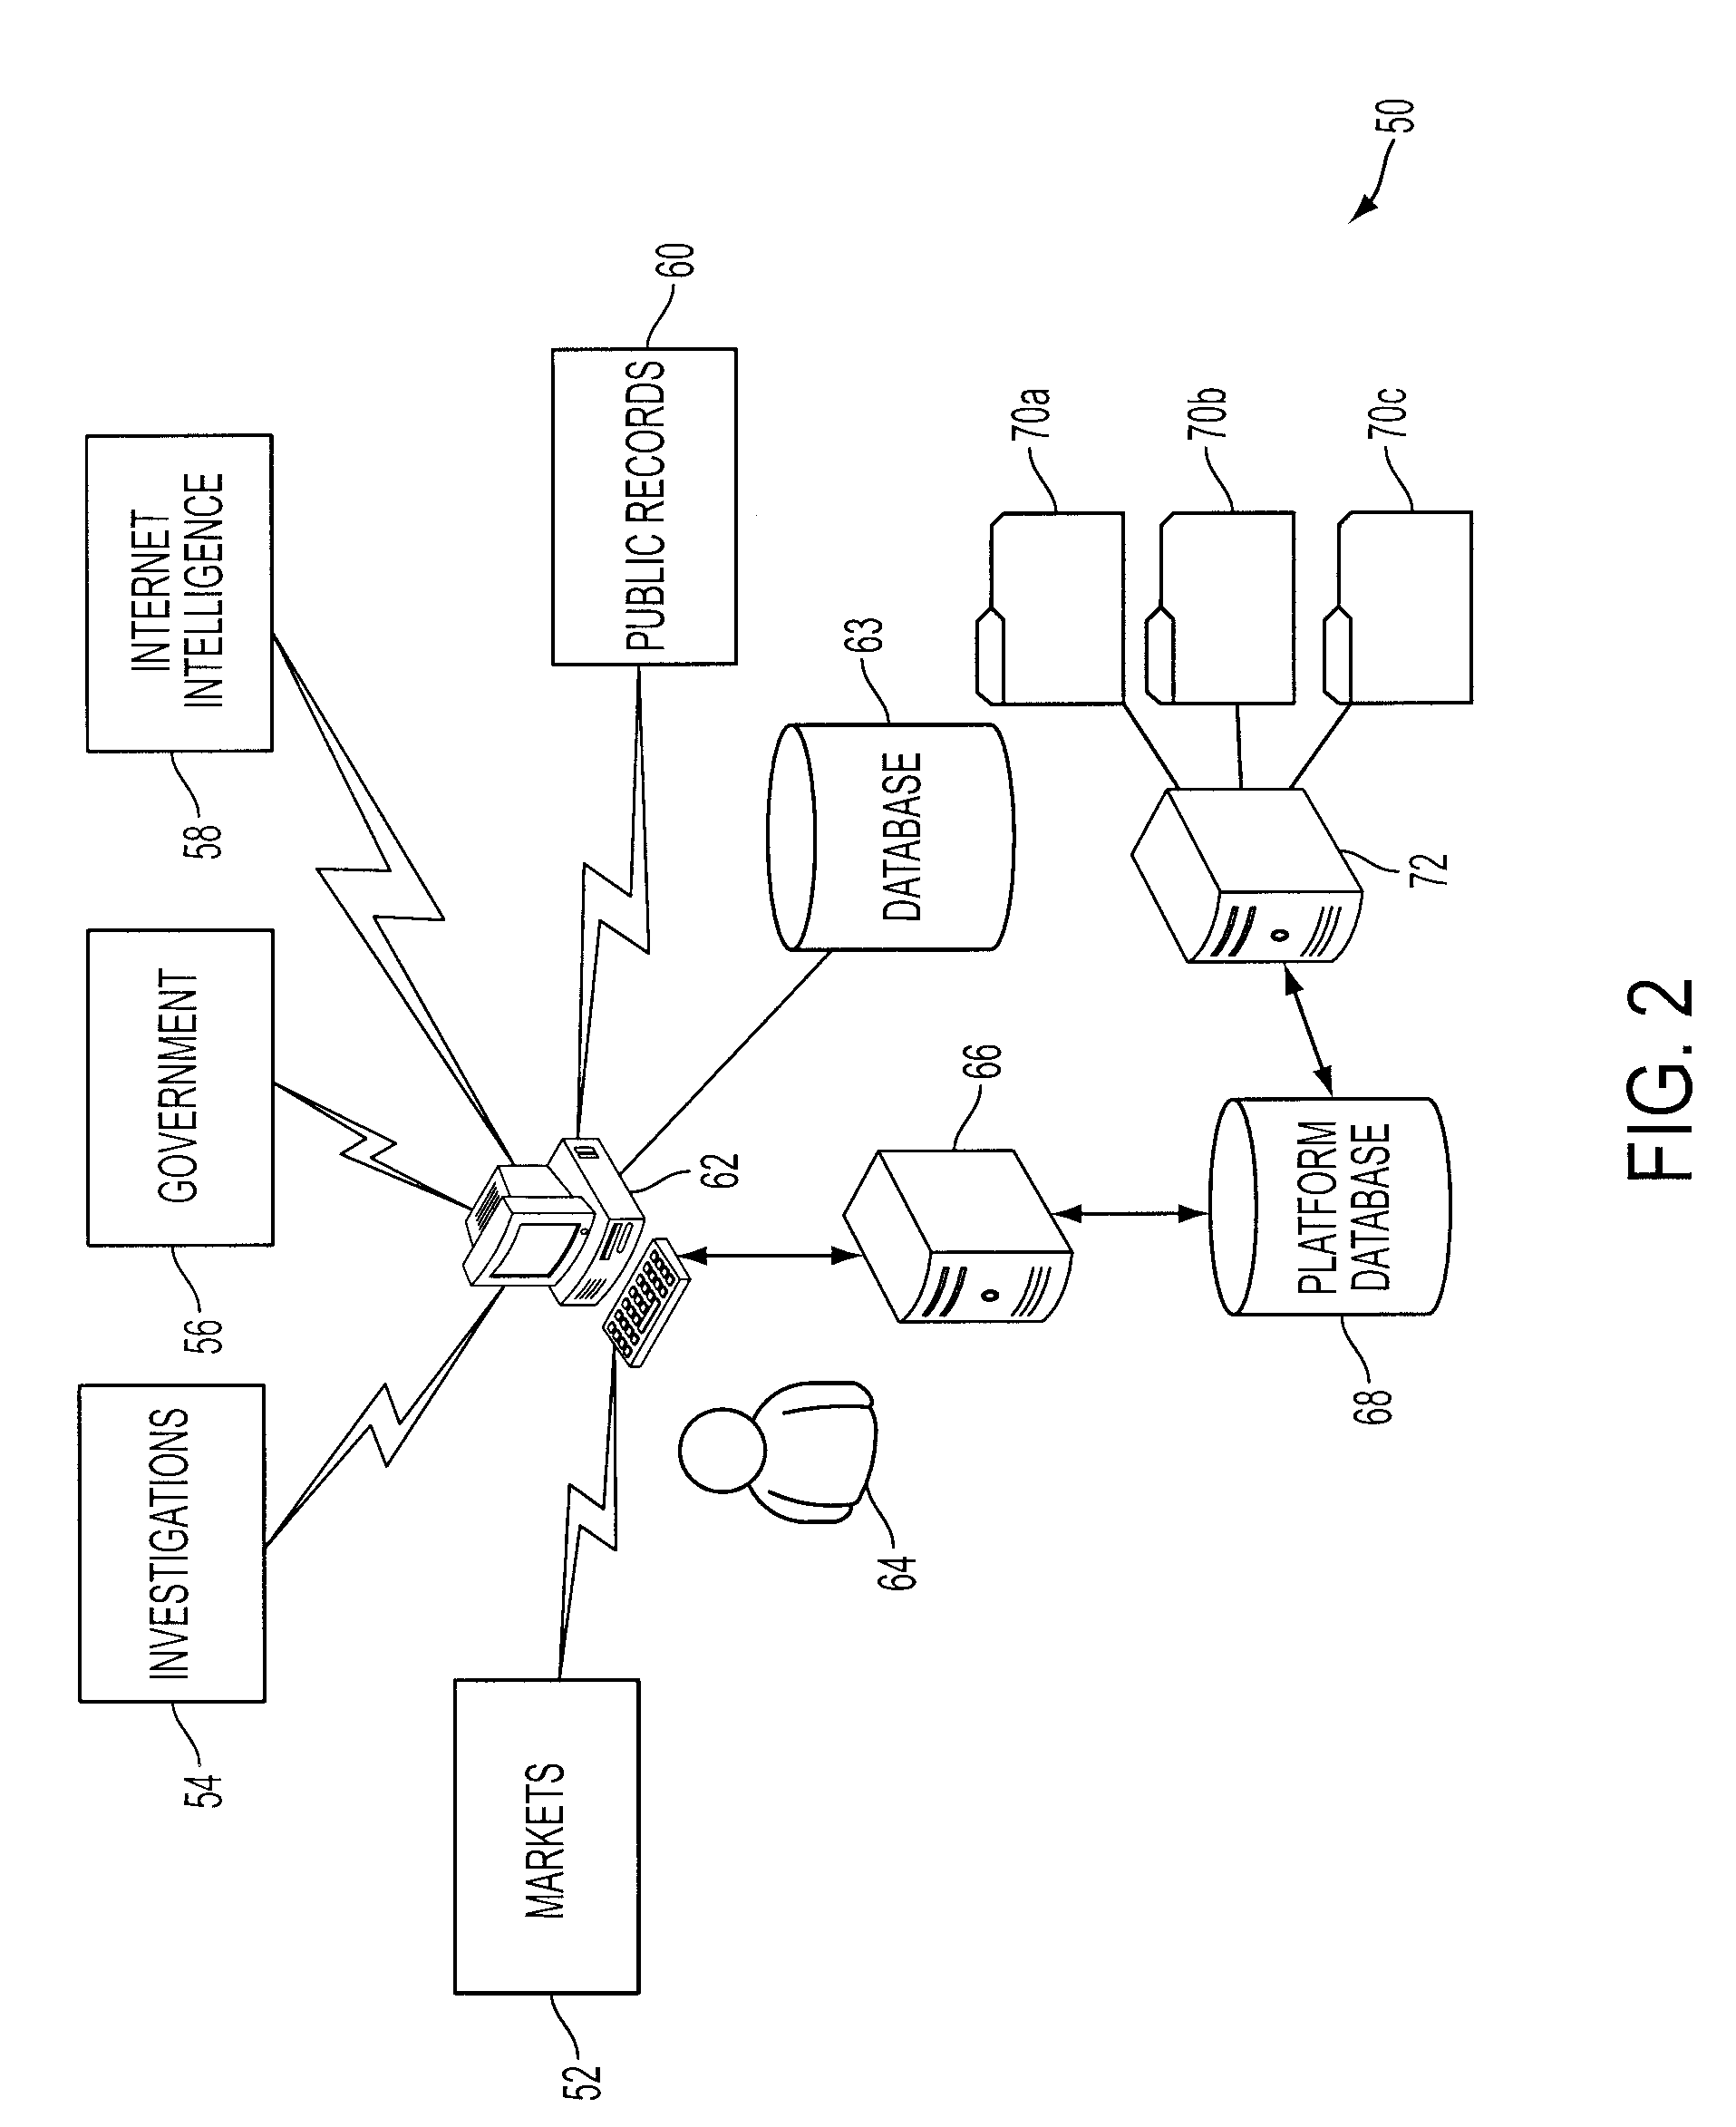 System And Method For Intelligent Information Gathering And Analysis